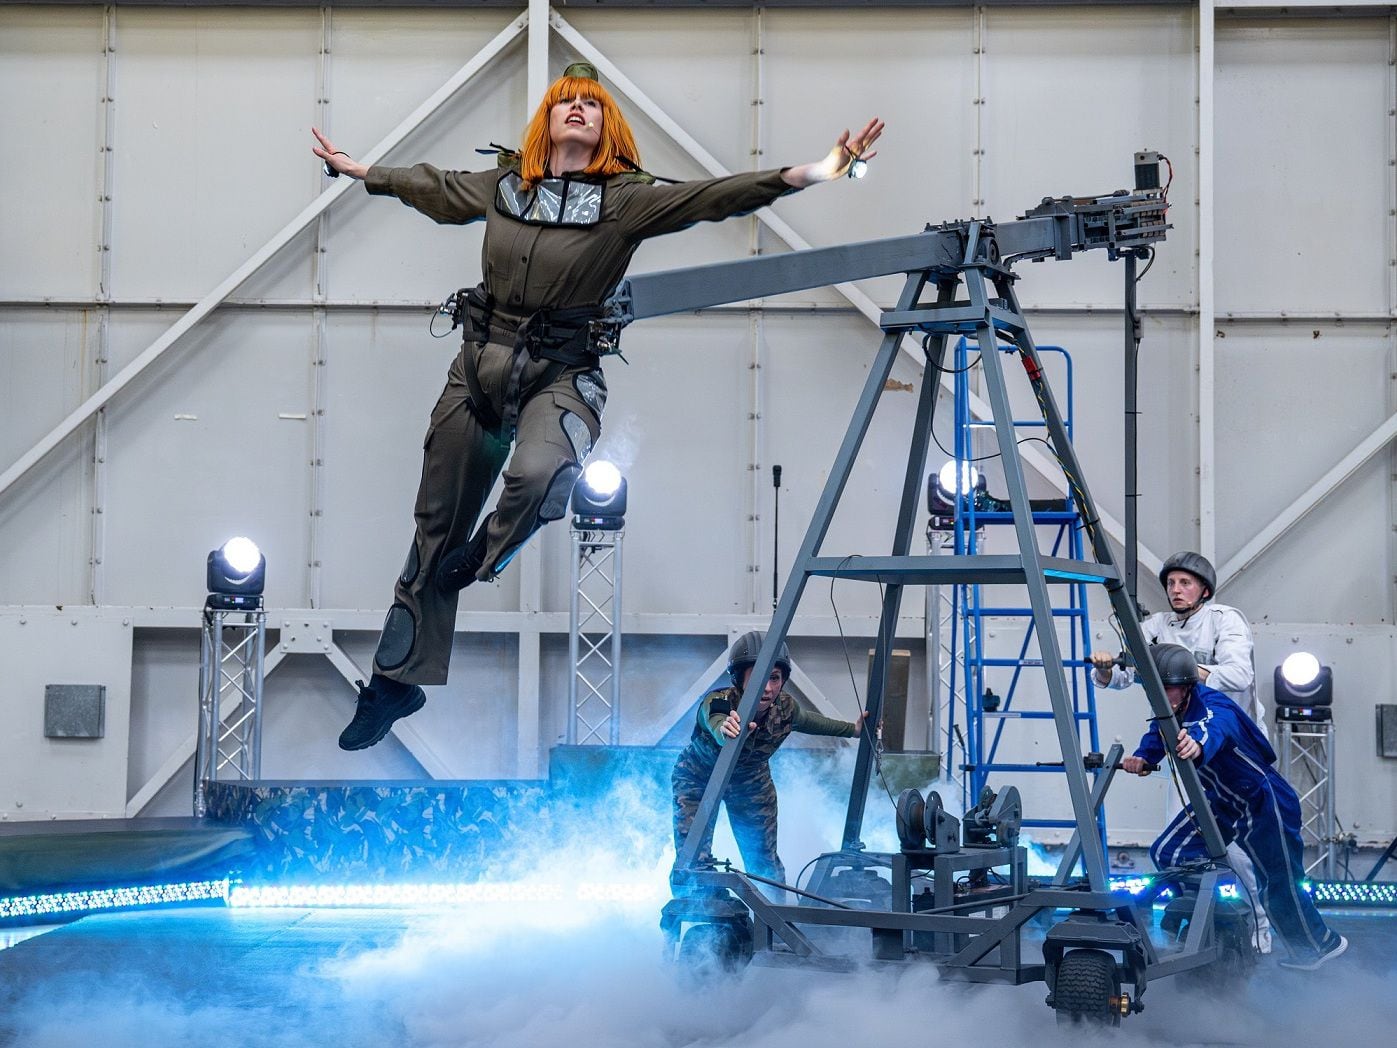 Watch: Lift-off for spectacular theatre show at RAF museum